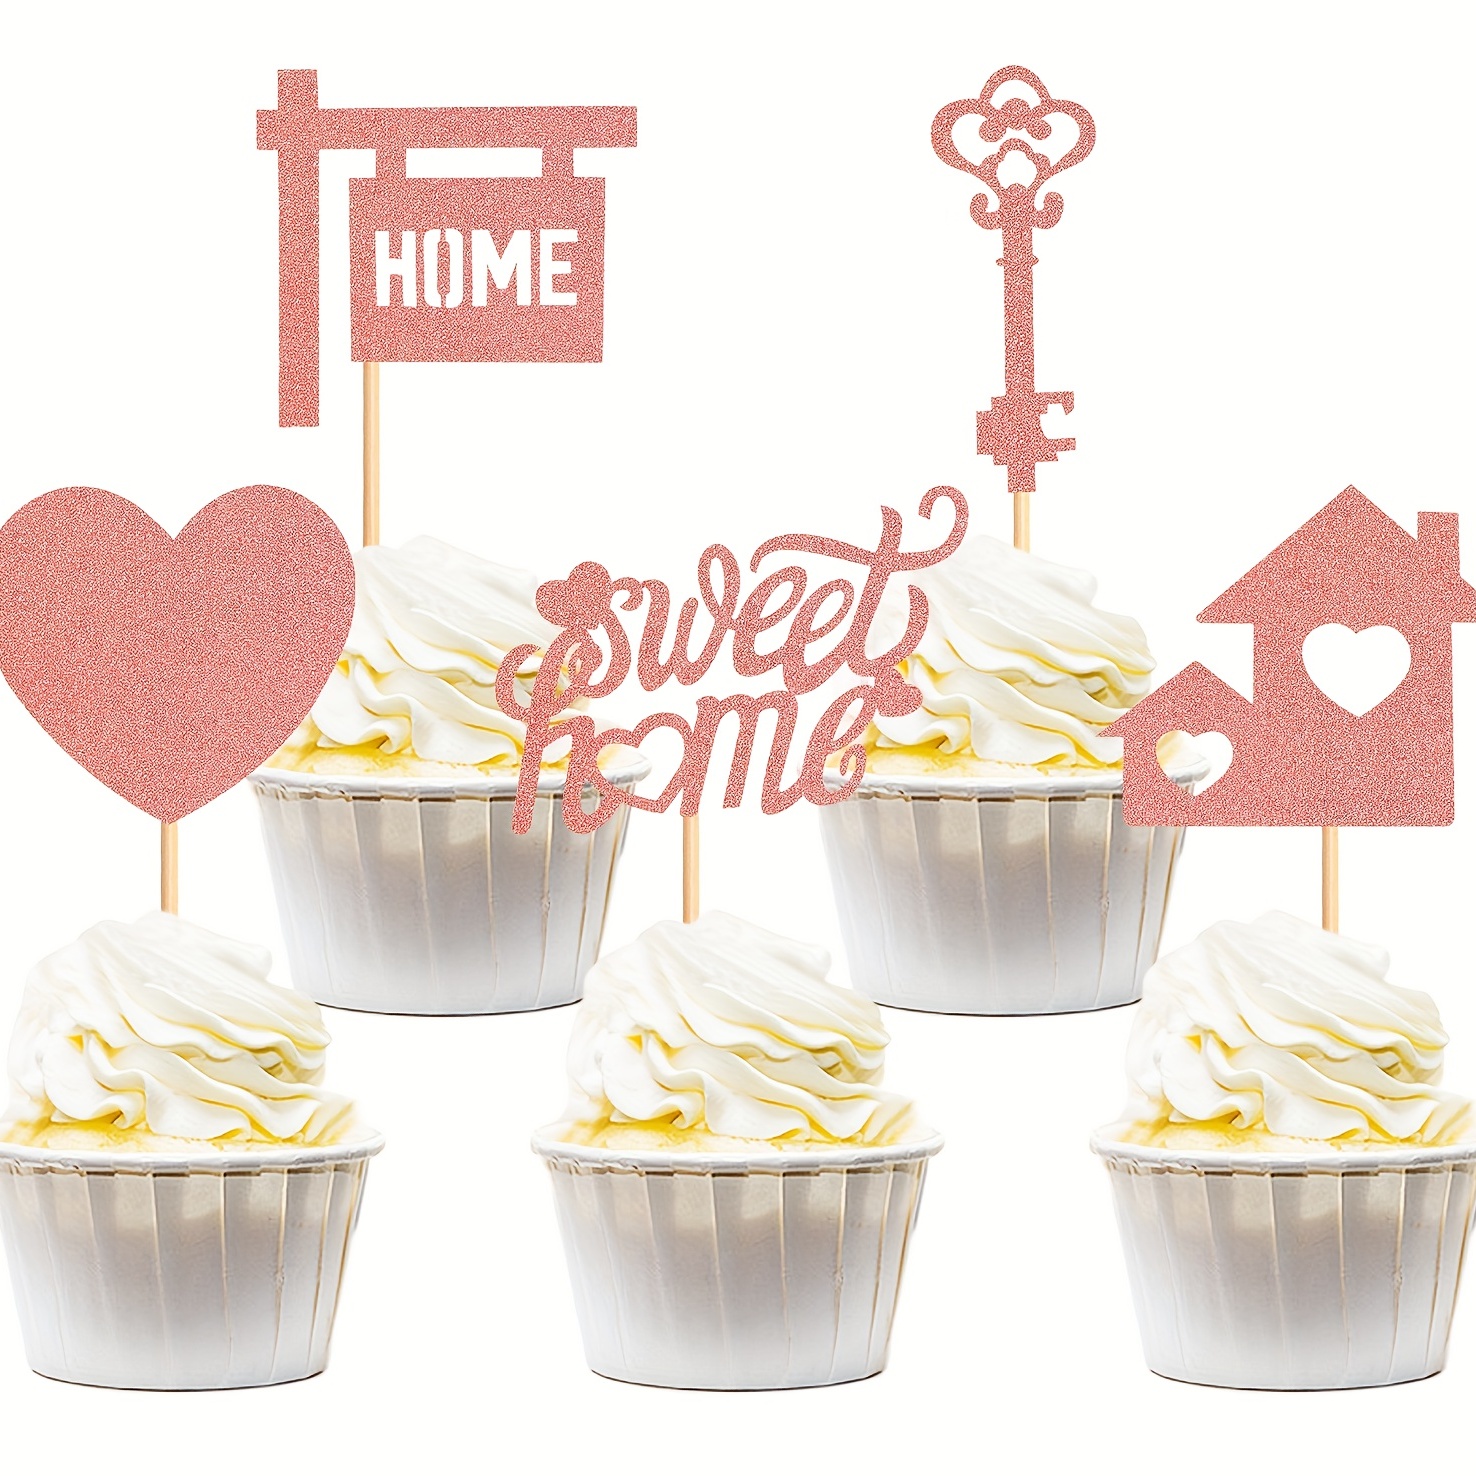 Home sweet home new home cake ... - Decorated Cake by - CakesDecor